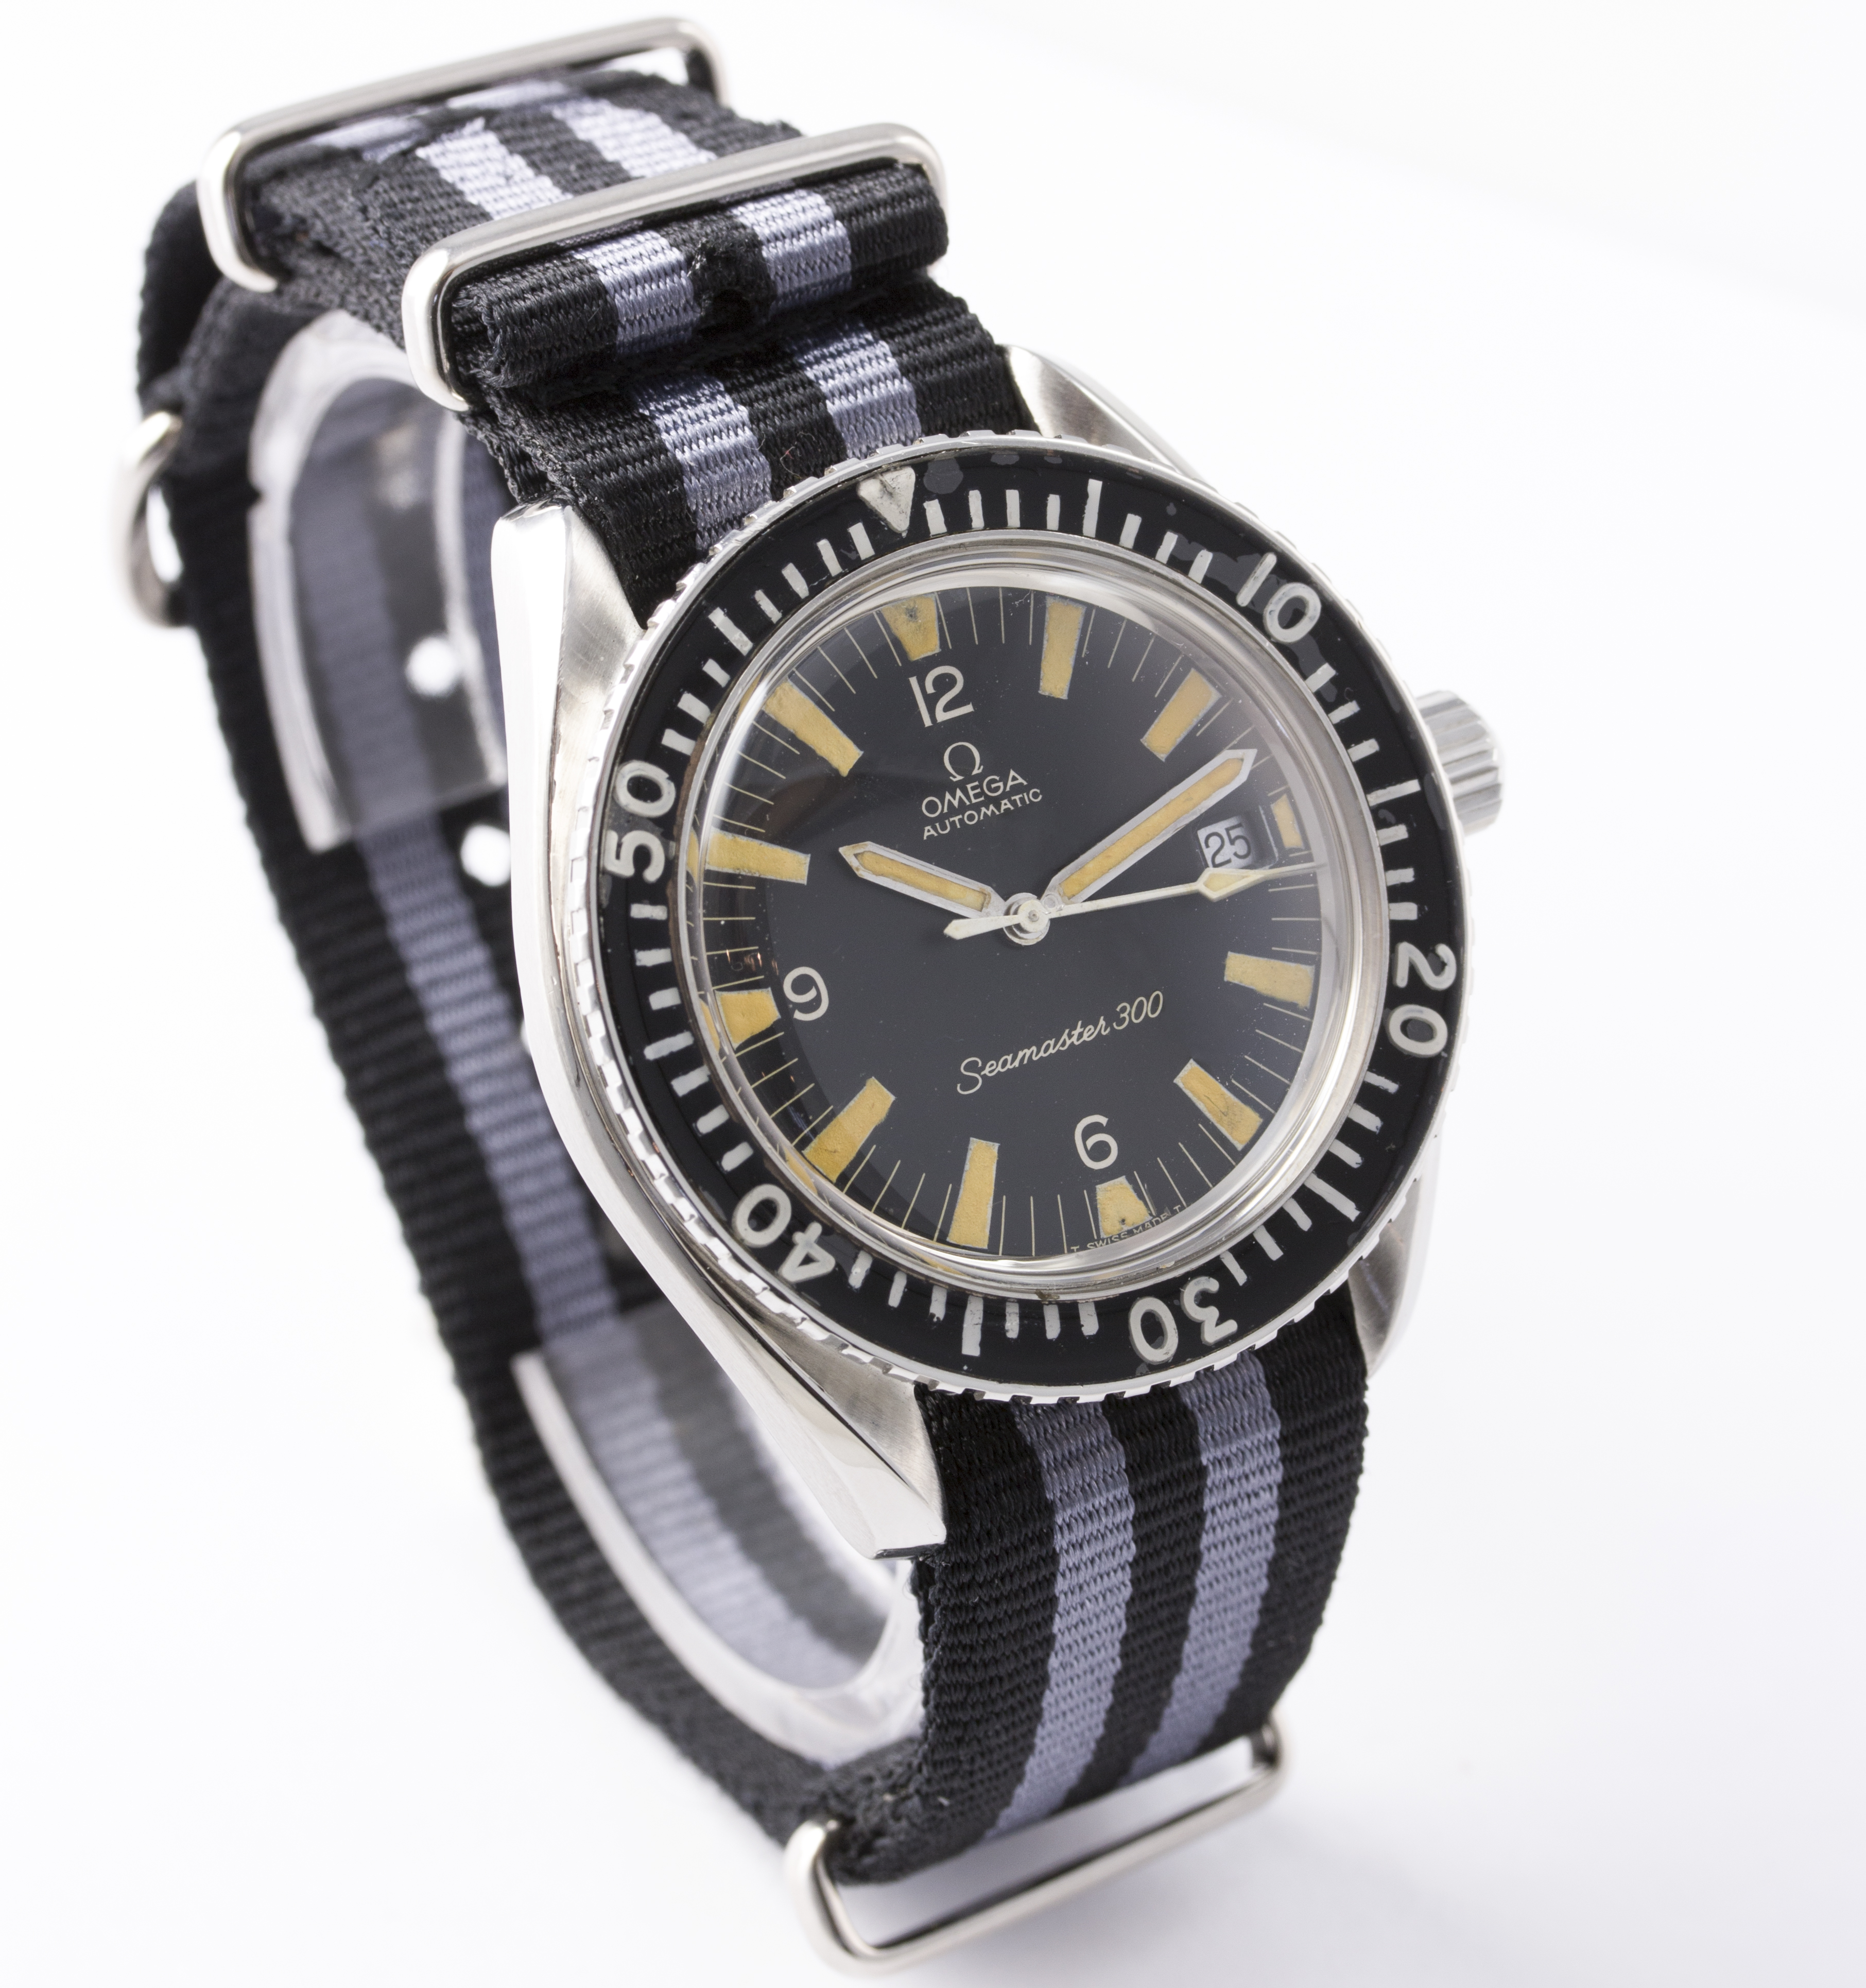 A RARE GENTLEMAN'S STAINLESS STEEL OMEGA SEAMASTER 300 WRIST WATCH CIRCA 1967, REF. 166.0024-67 SC - Image 5 of 8